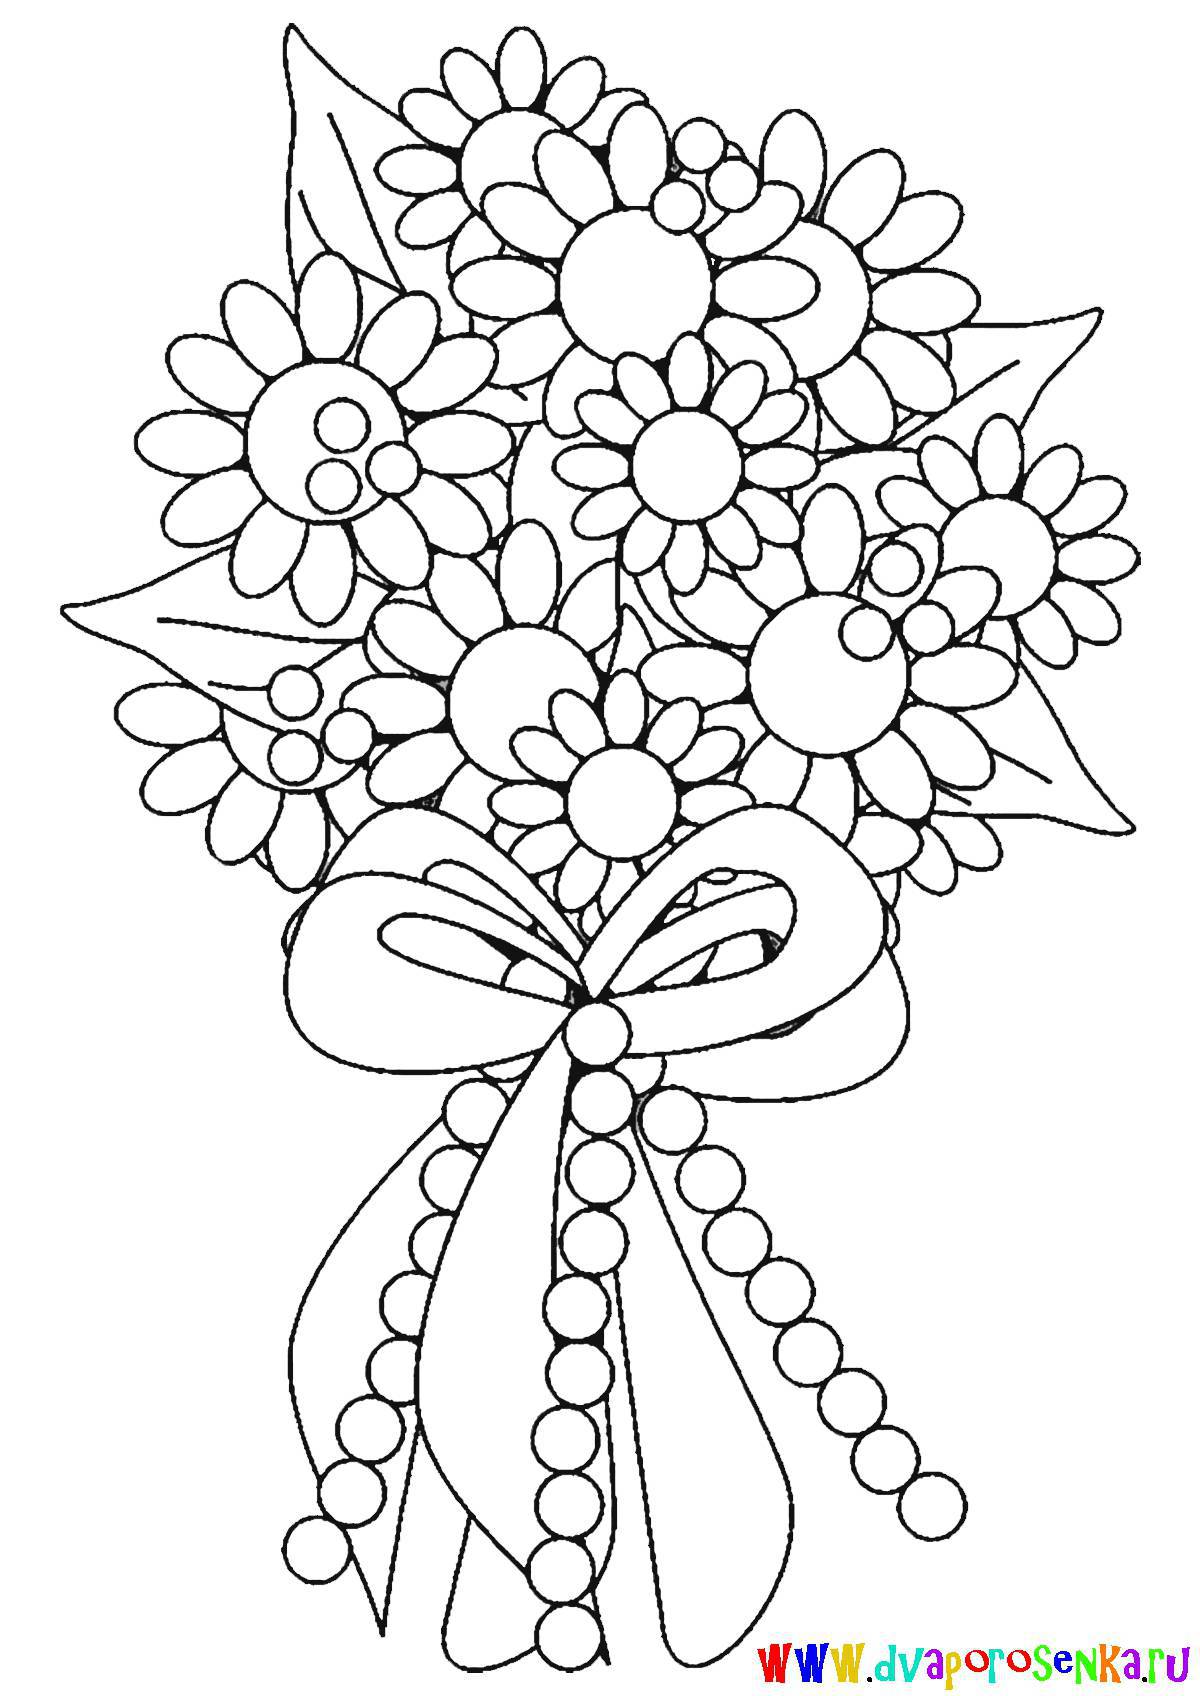 Colored bouquet of flowers for children